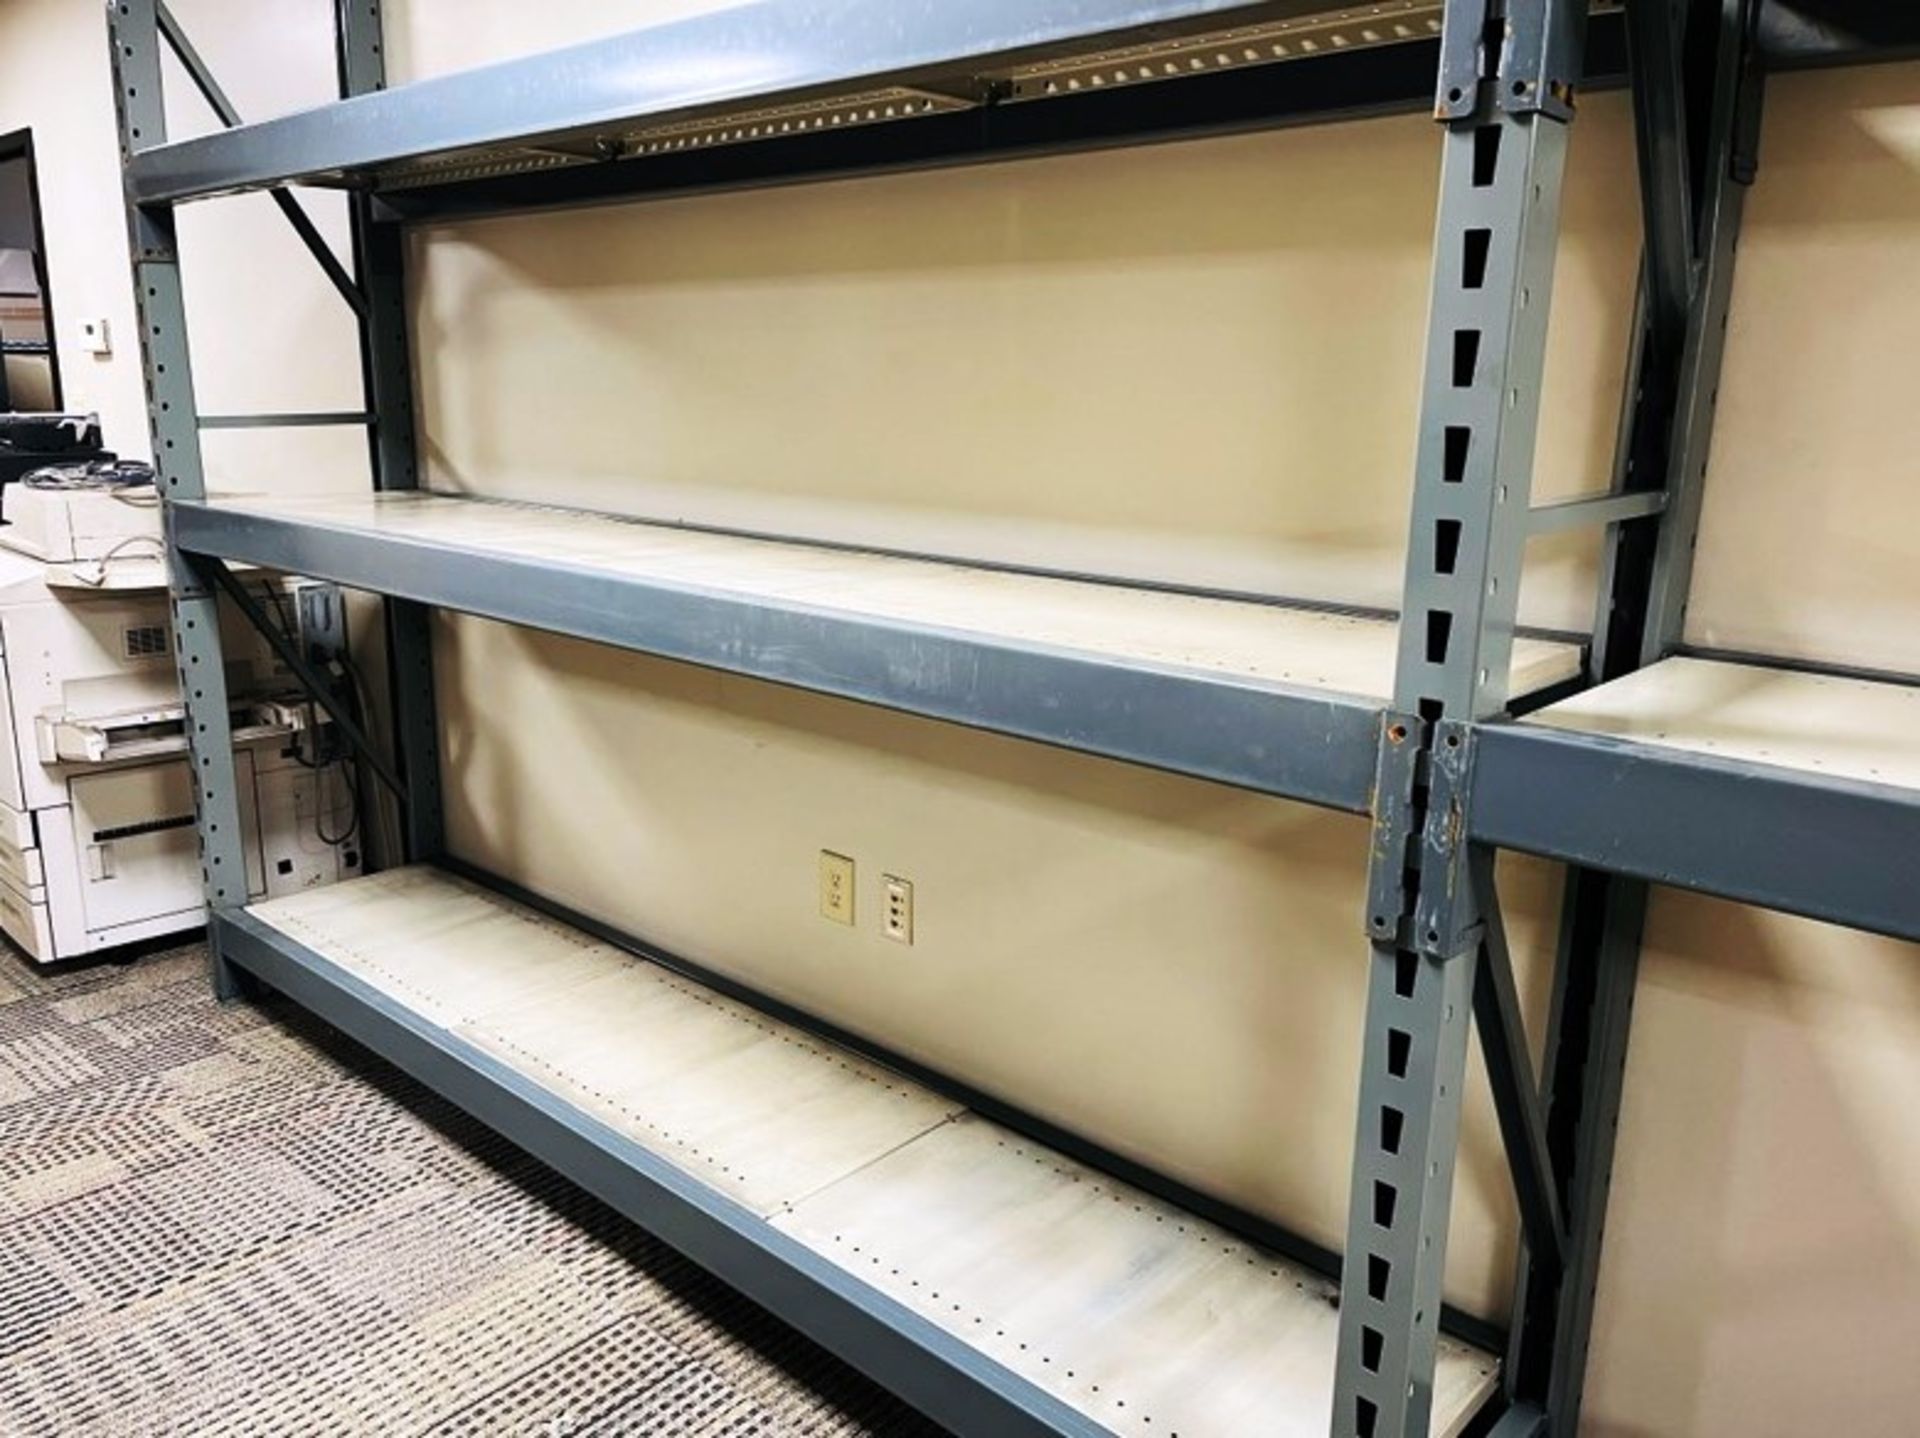 5 SECTION OF RETAIL/MERCHANDISE PALLET RACK SHELVING 6'H X 21.5"D X 108"L WITH 3 SHELVES - Image 4 of 4